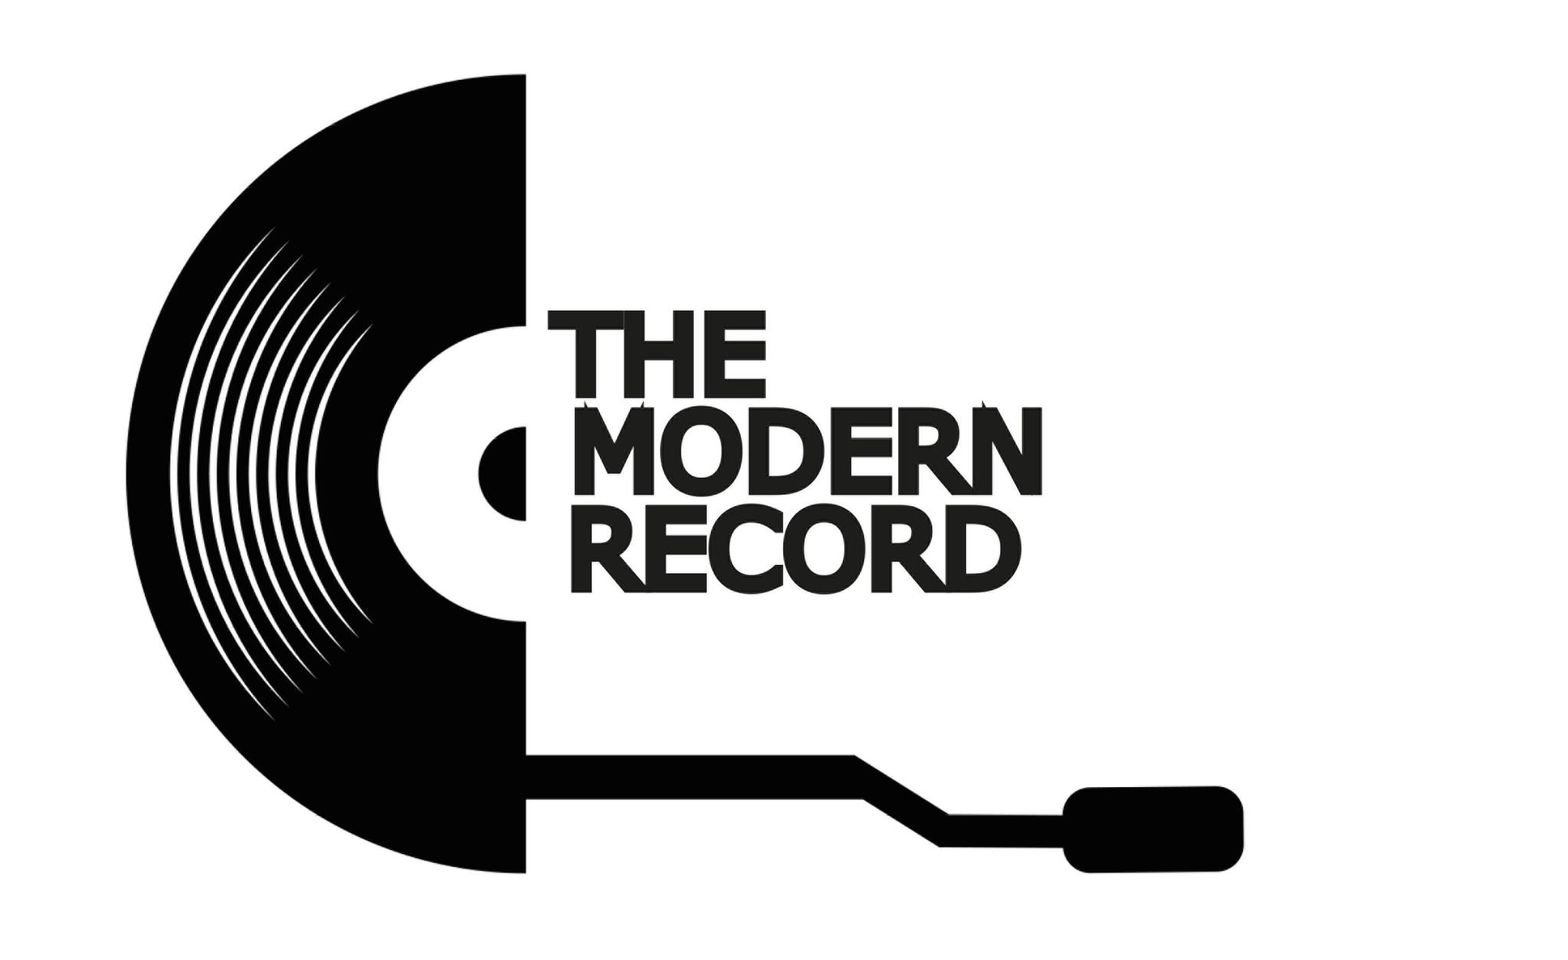 THE MODERN RECORD